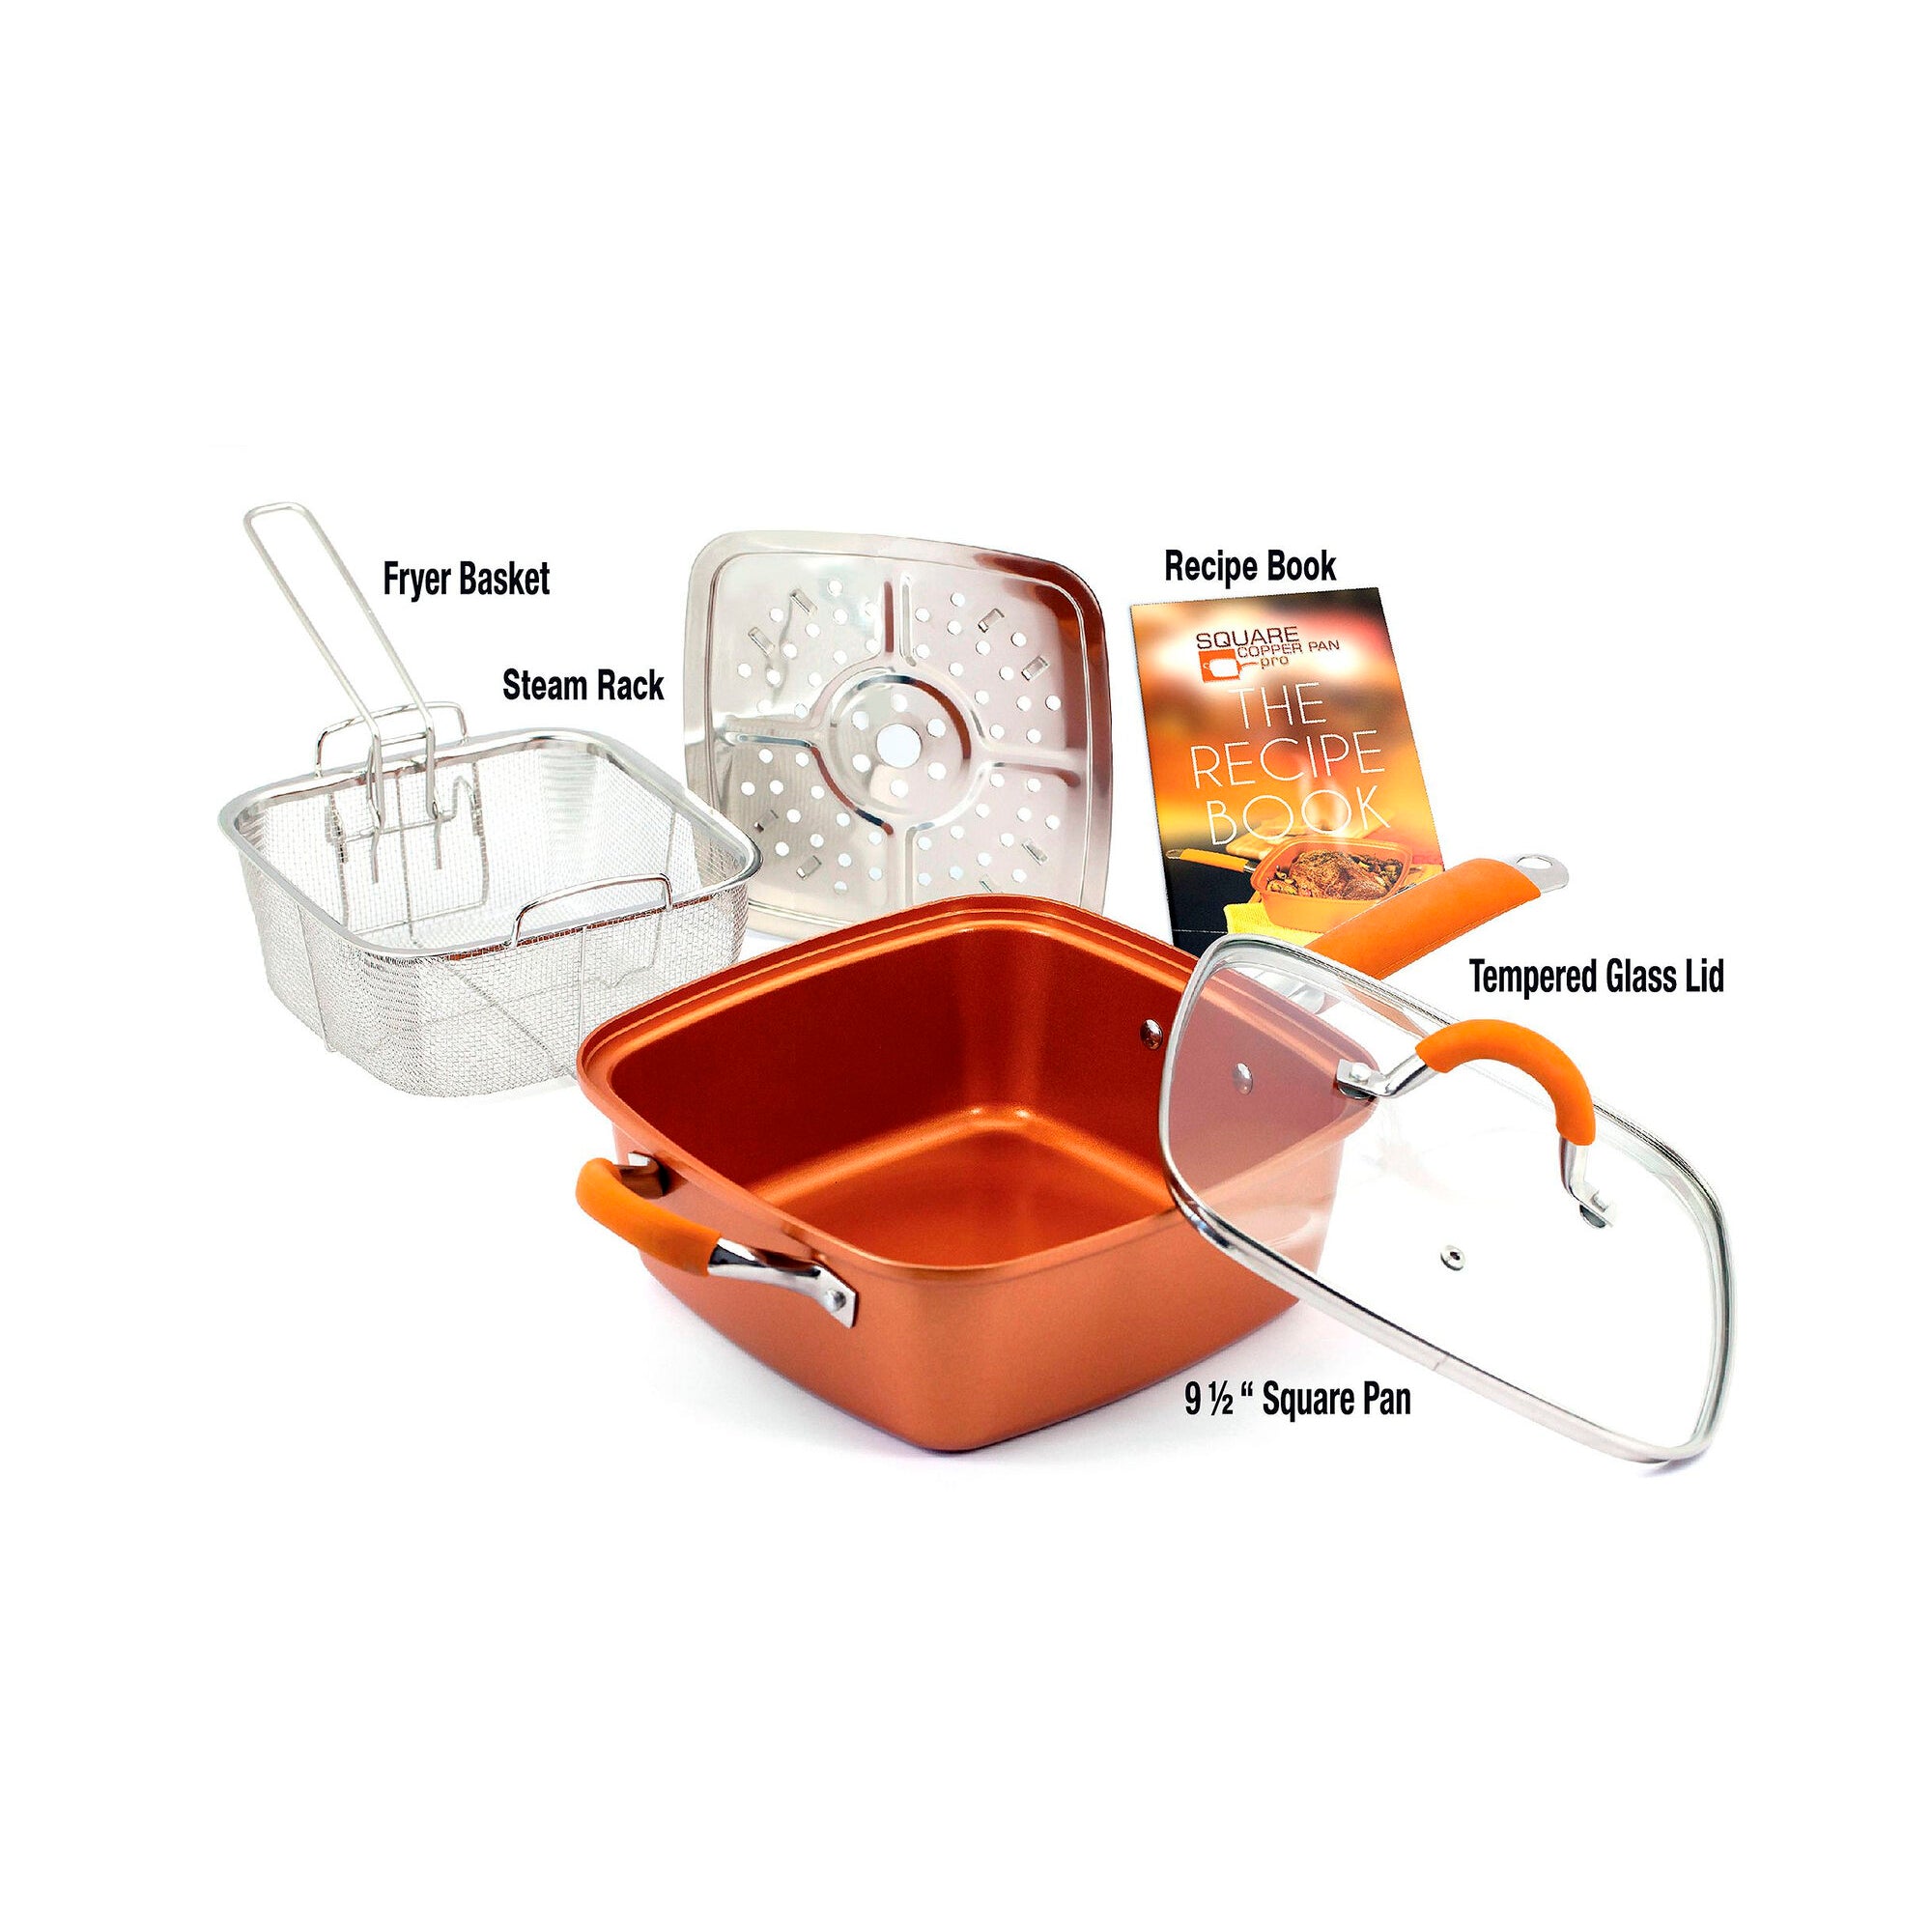 As Seen On TV Red Copper Square Pan 5-Piece Set